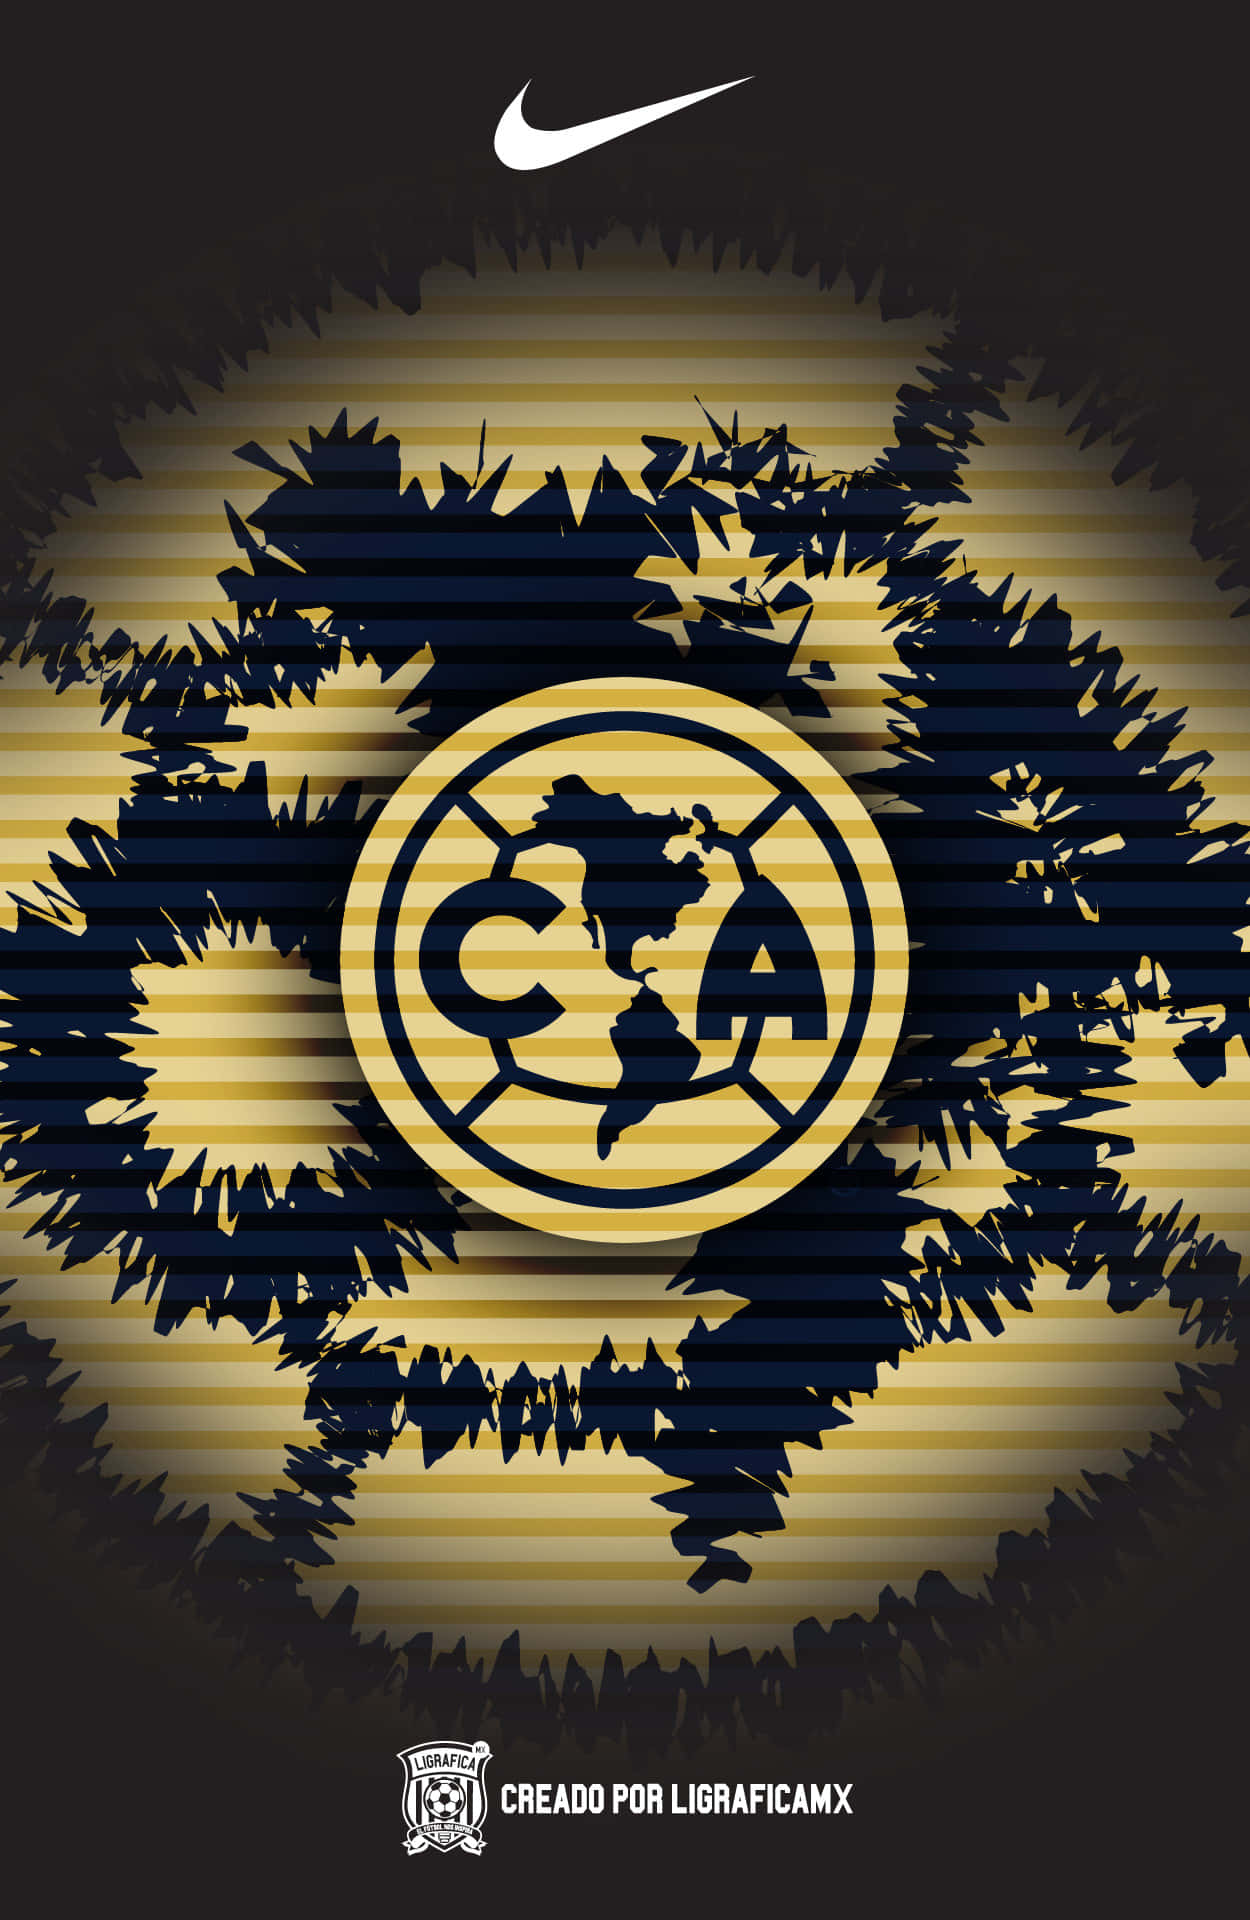 The iconic cross pattern of Club America Wallpaper